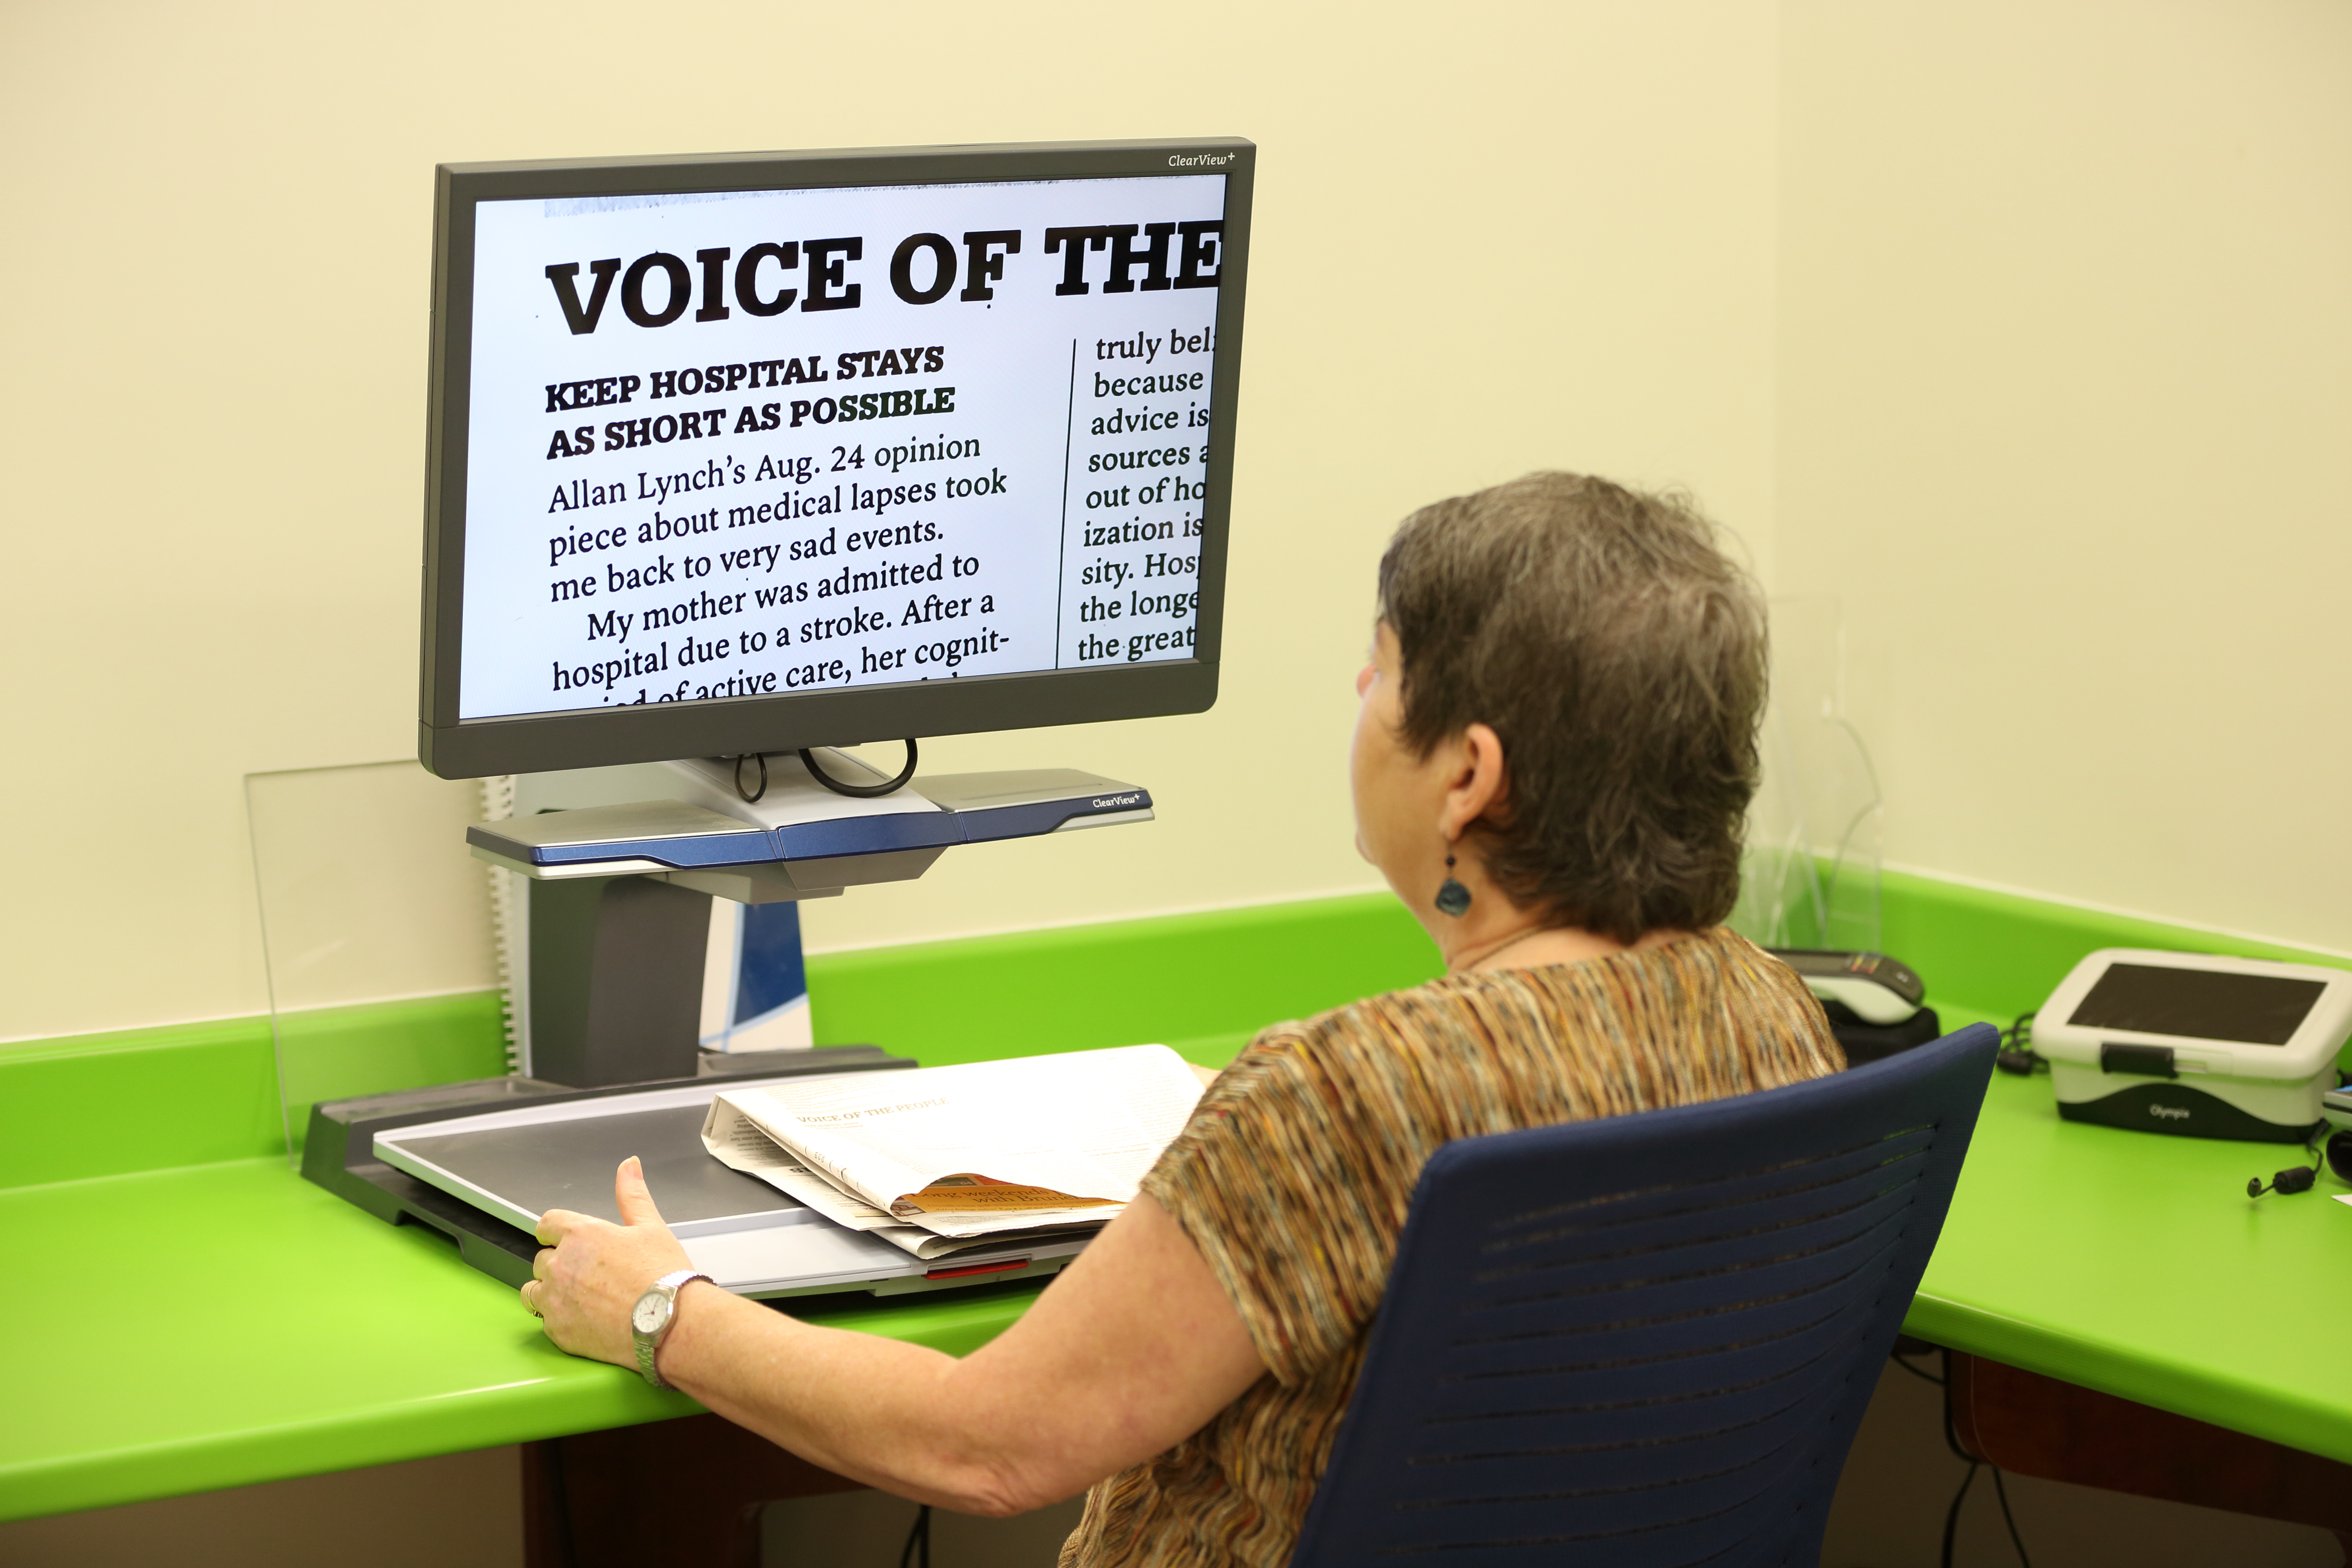  A woman sits at a CCTV and reads an enlarged document displayed on the screen.